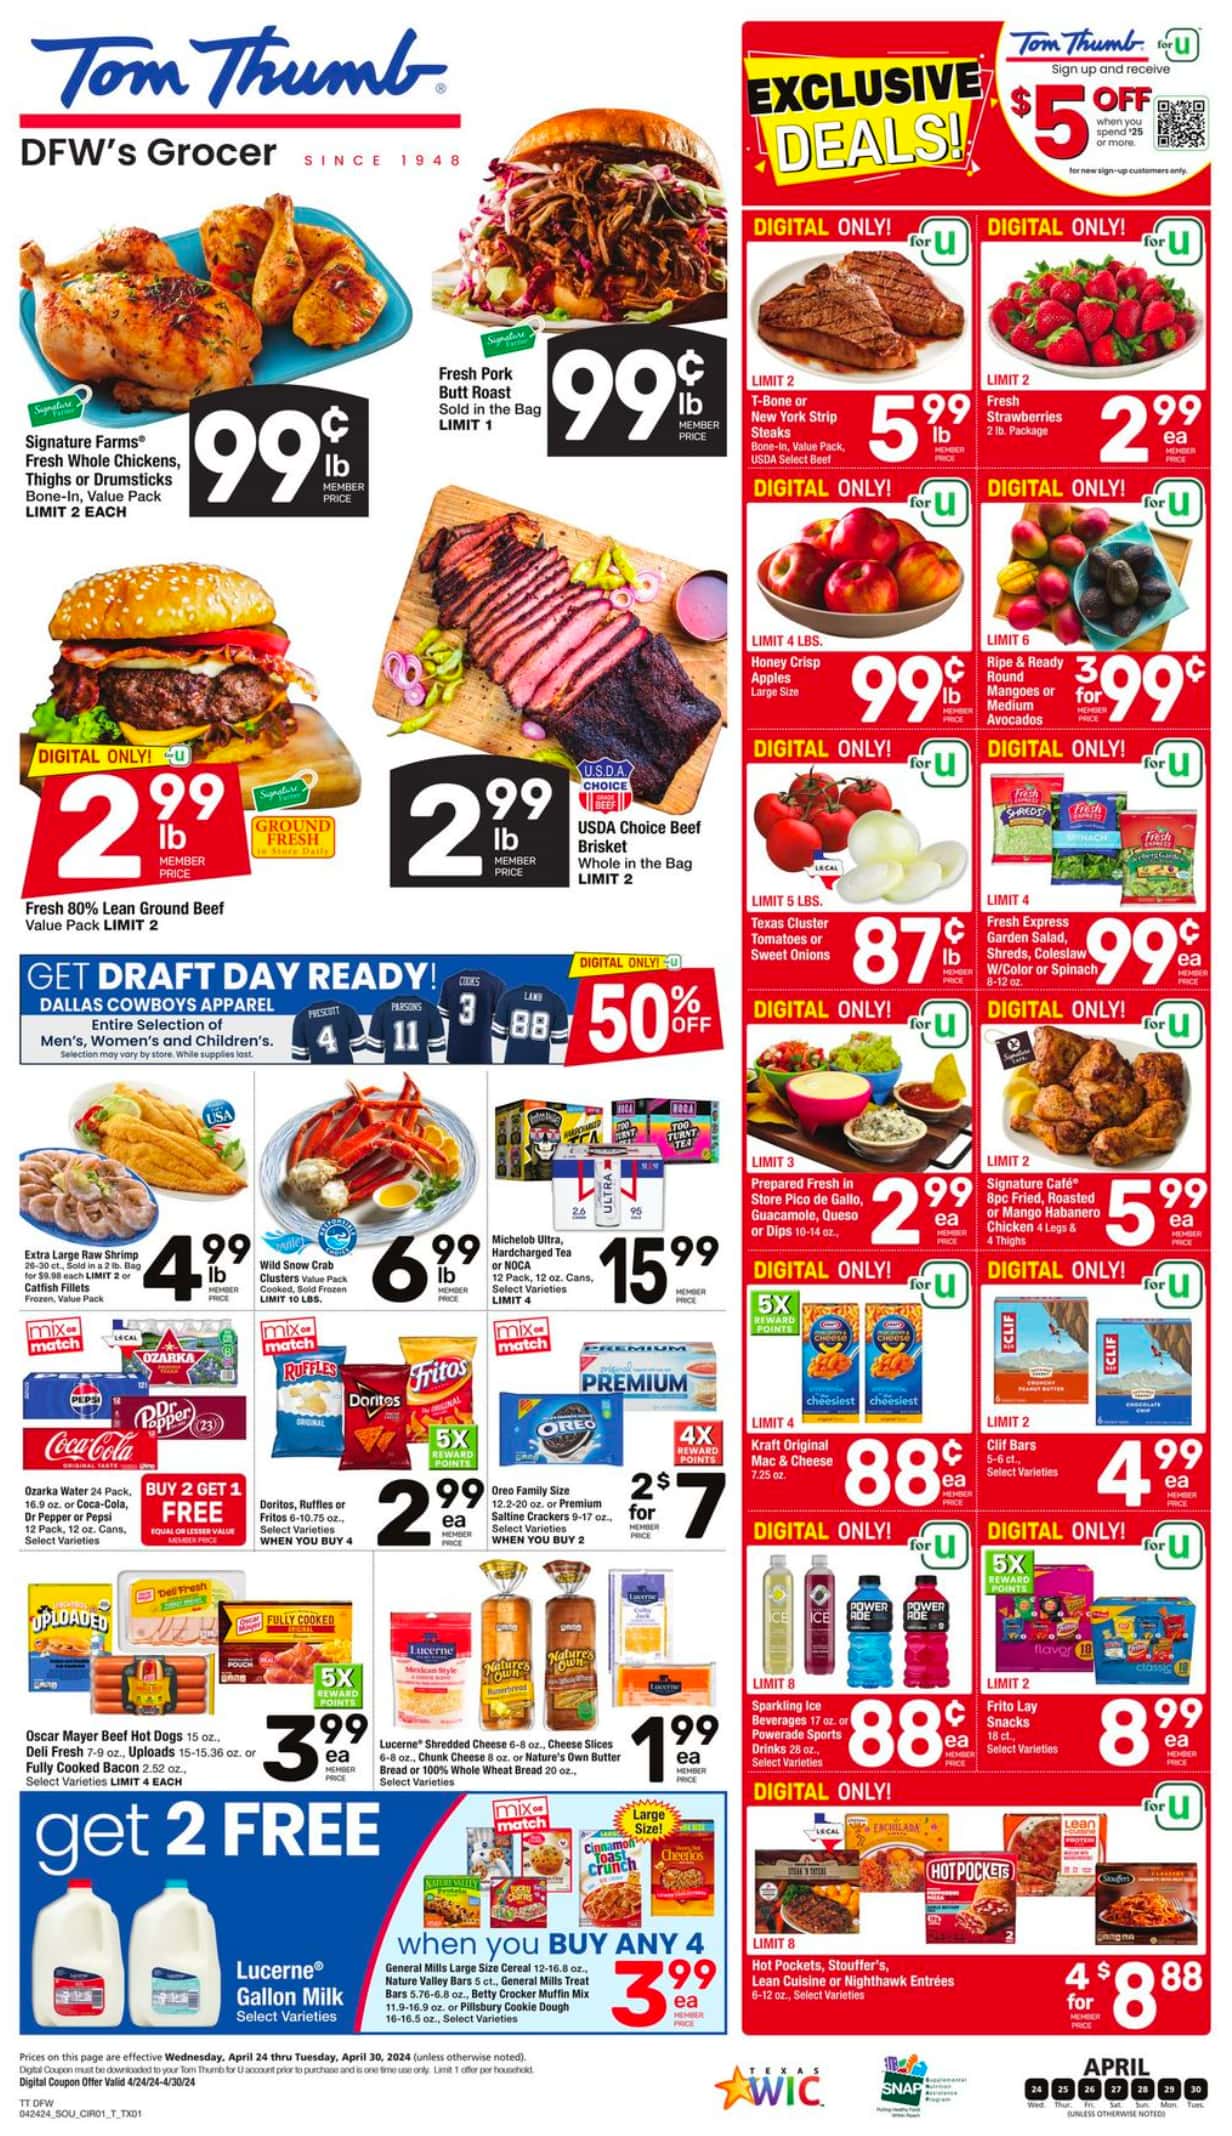 TomThumb_weekly_ad_042424_01